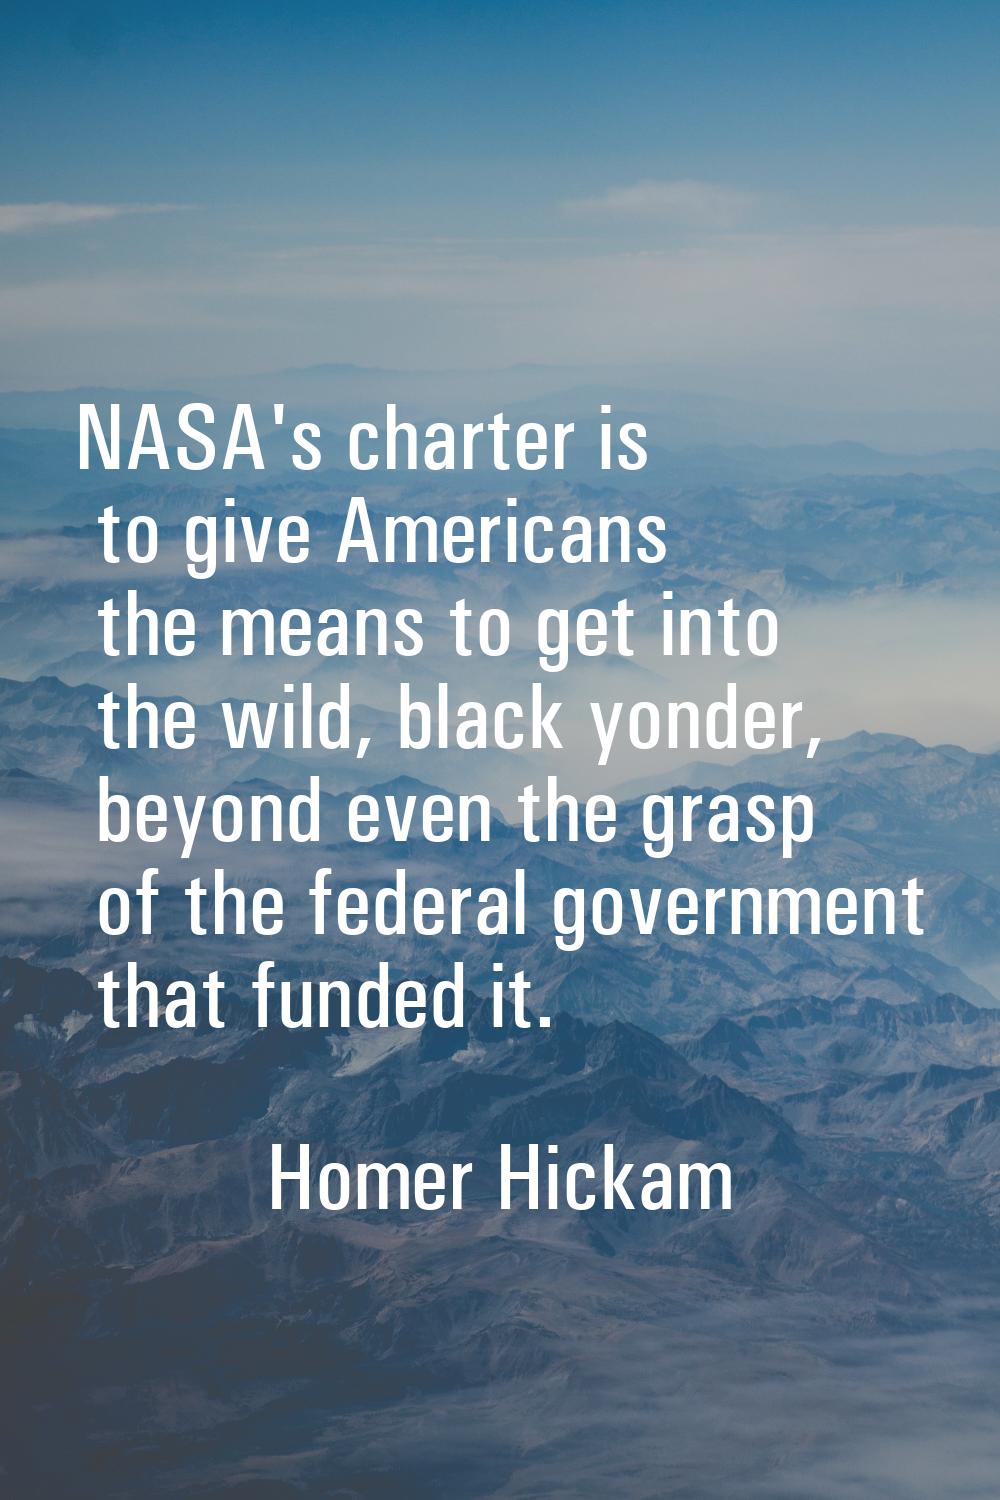 NASA's charter is to give Americans the means to get into the wild, black yonder, beyond even the g